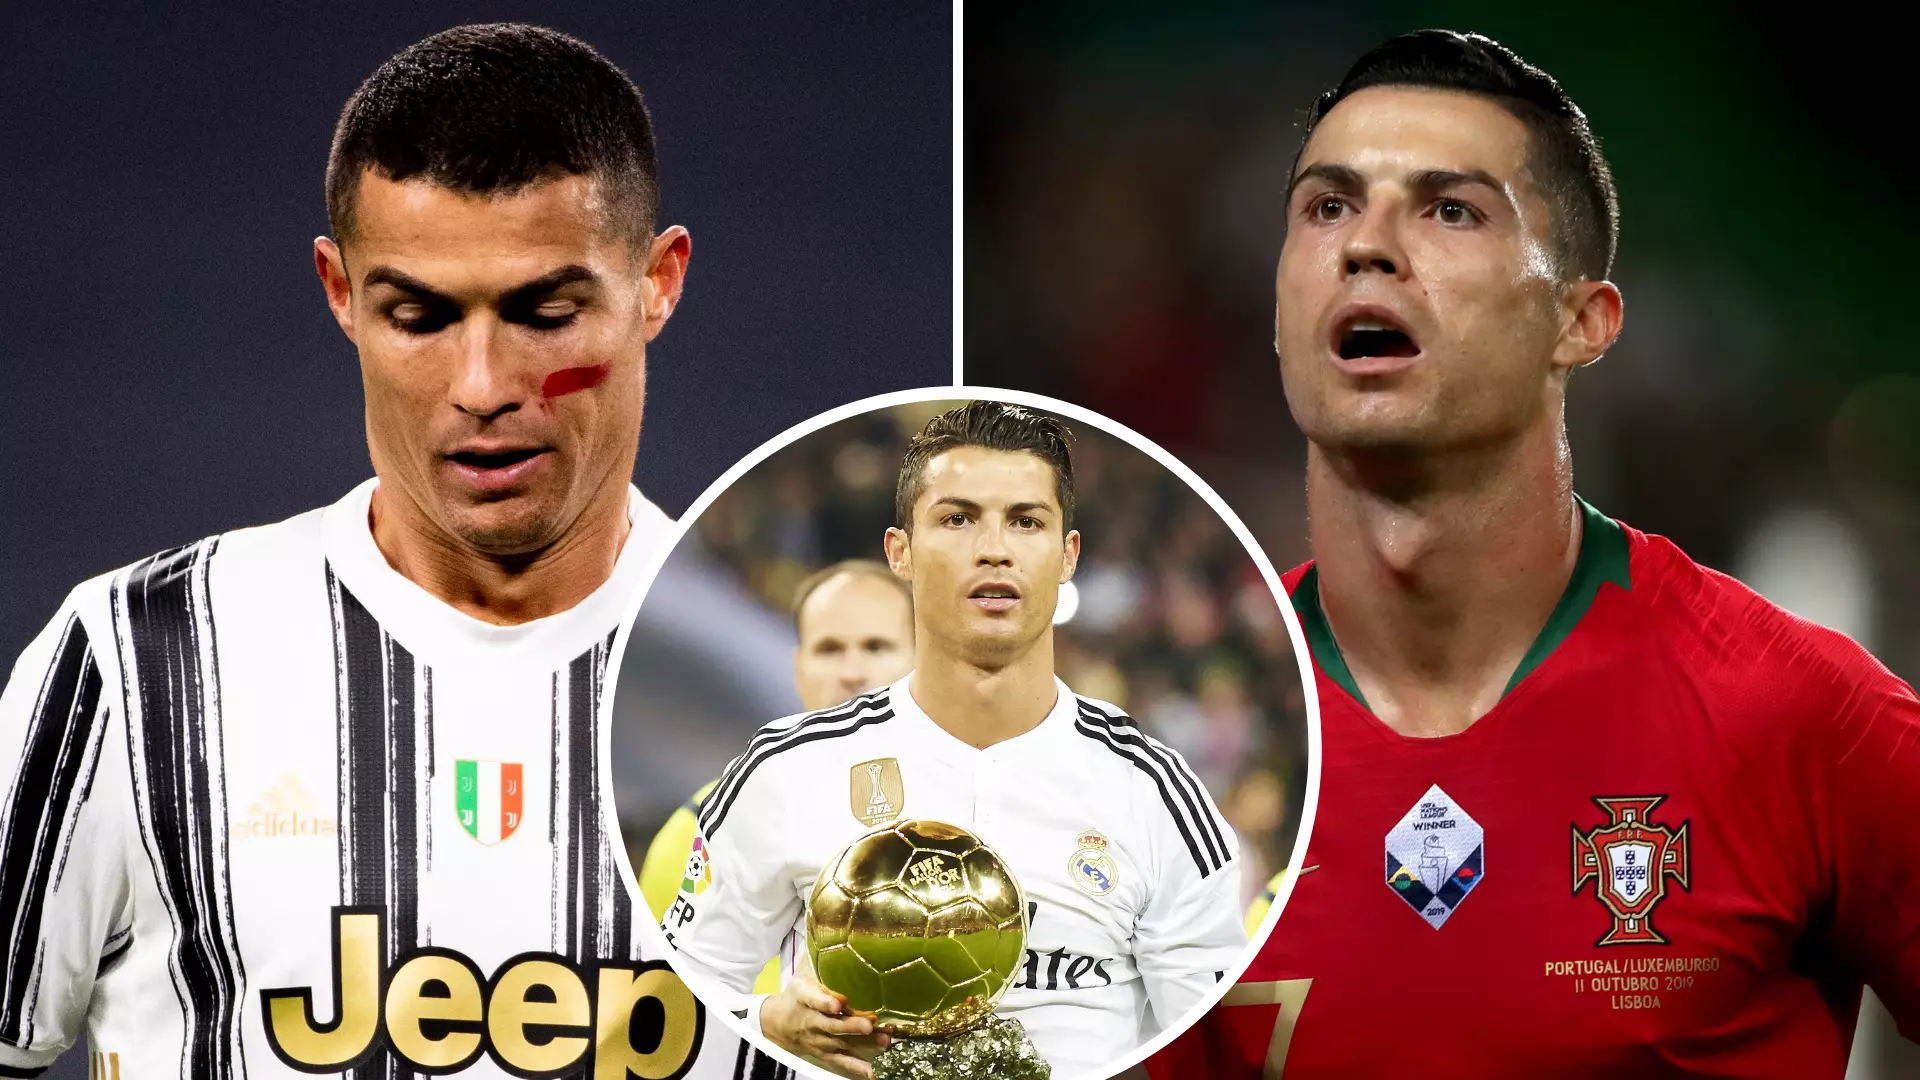 In 2010, The 25 Next 'Cristiano Ronaldos' In World Football Were Predicted